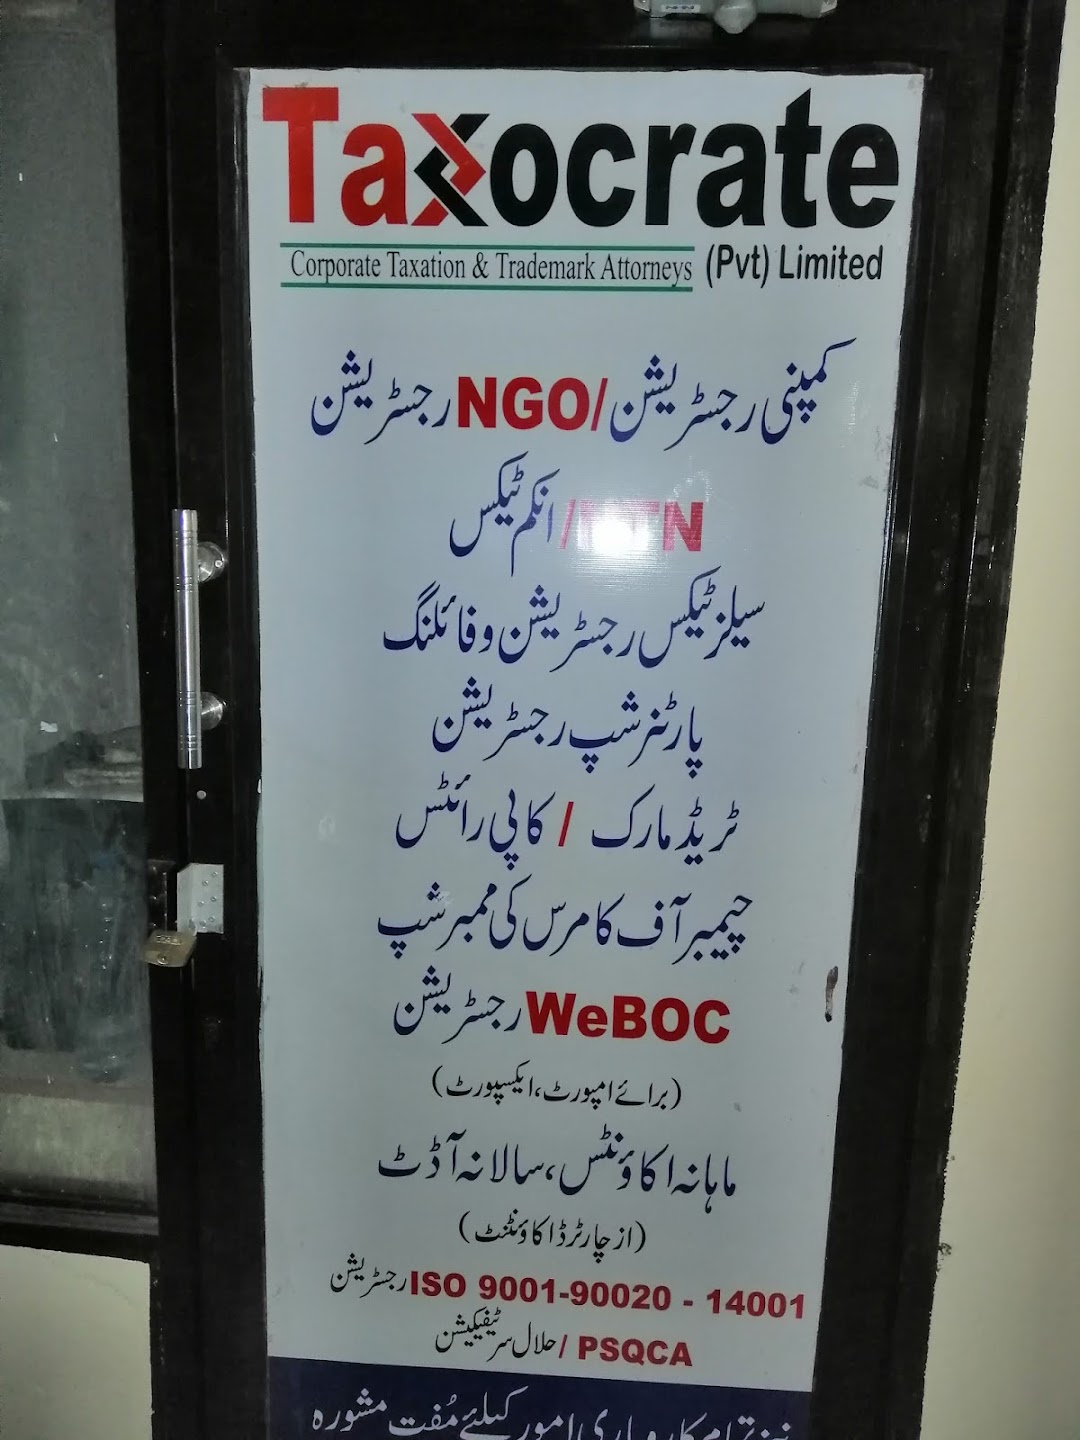 Company Registration & Income Tax Branch of TAXOCRATE (Pvt) LIMITED